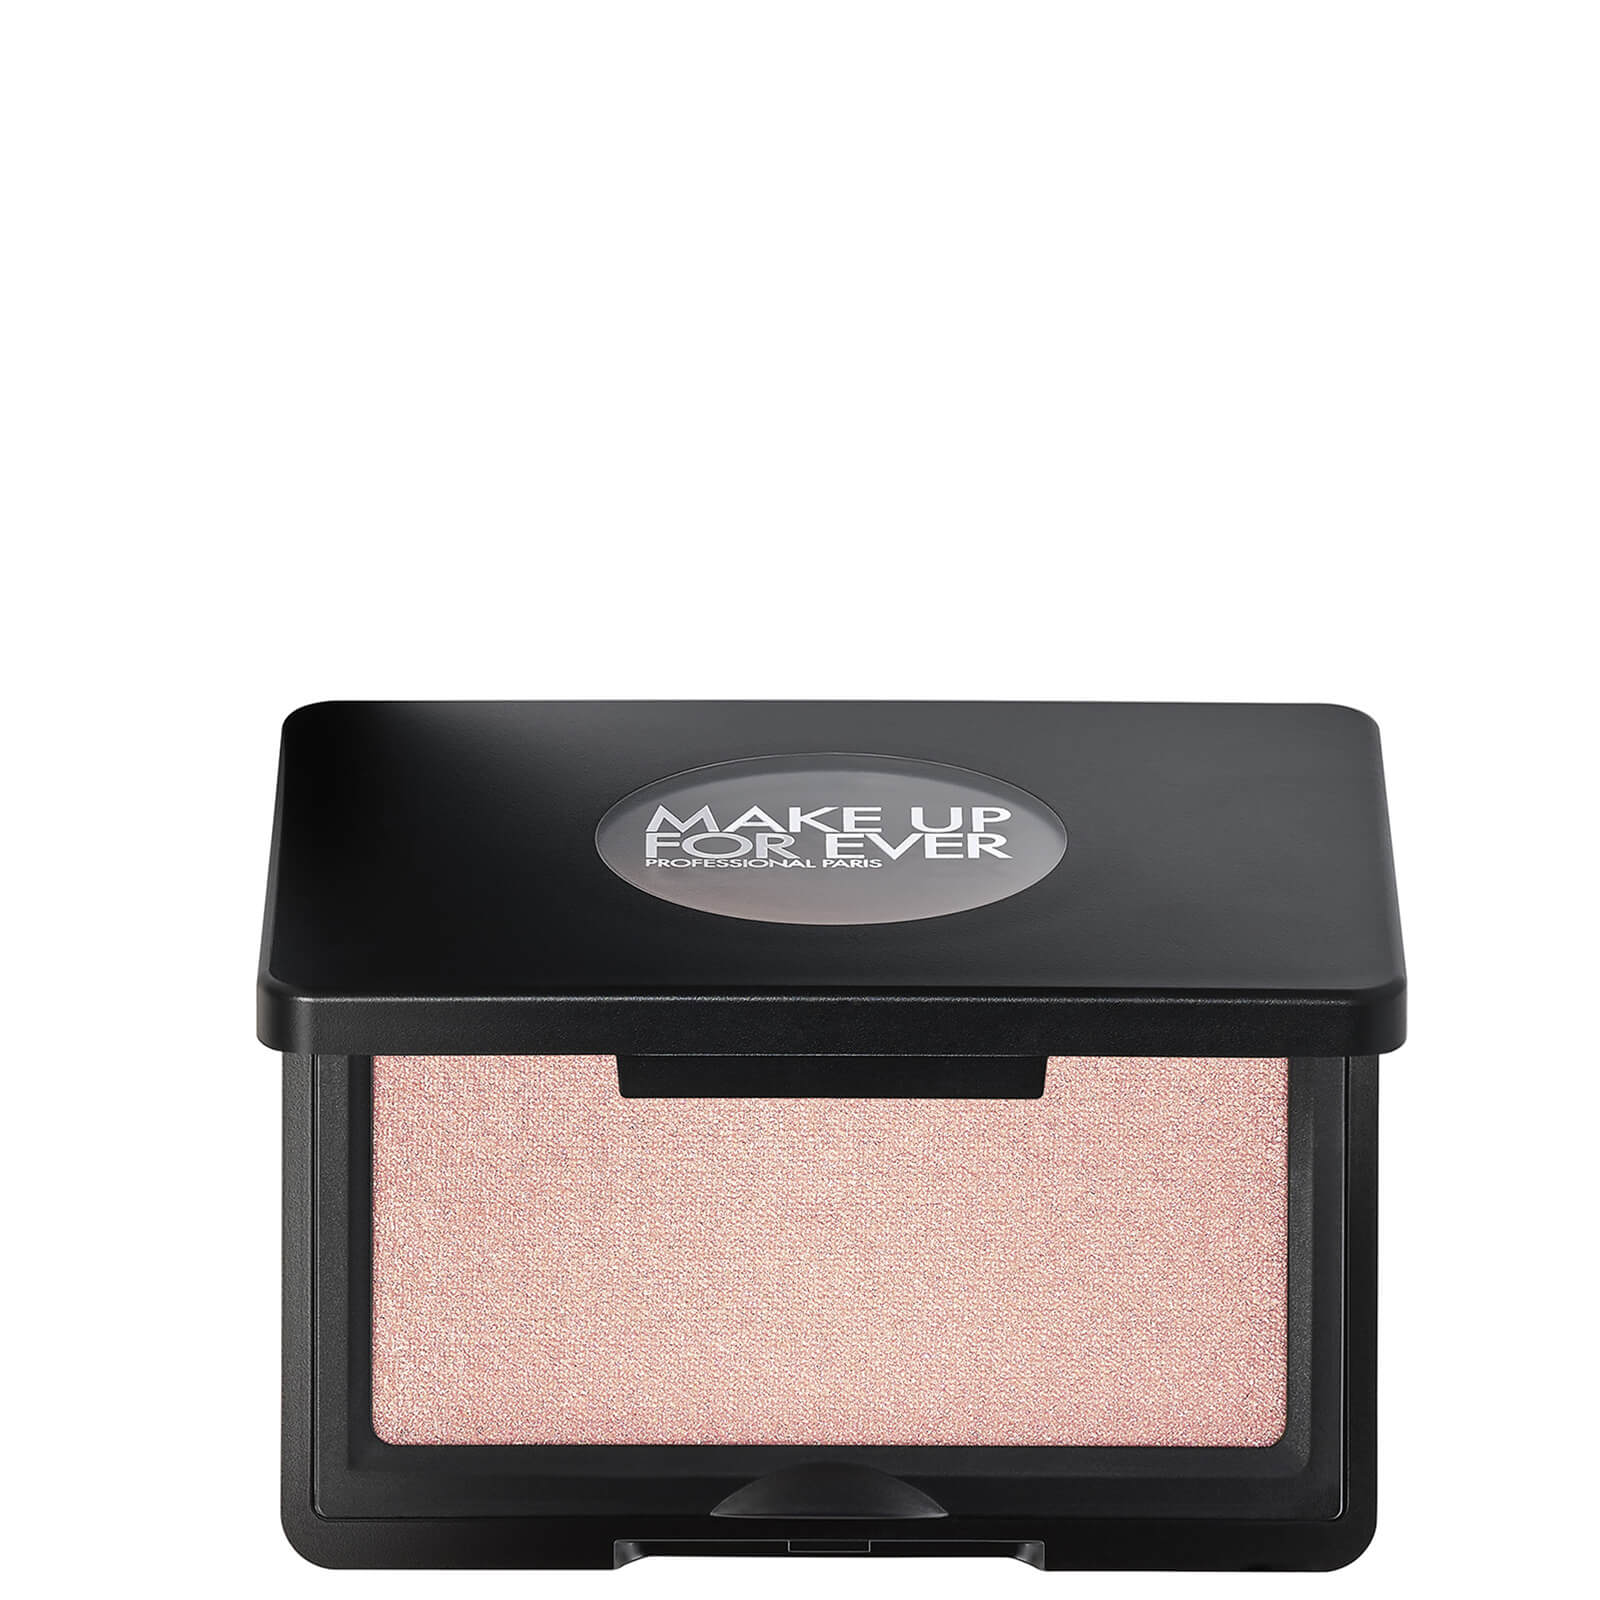 MAKE UP FOR EVER Artist Face Powders Highlighter 4g (Various Shades) - H130 - Wherever Pearl